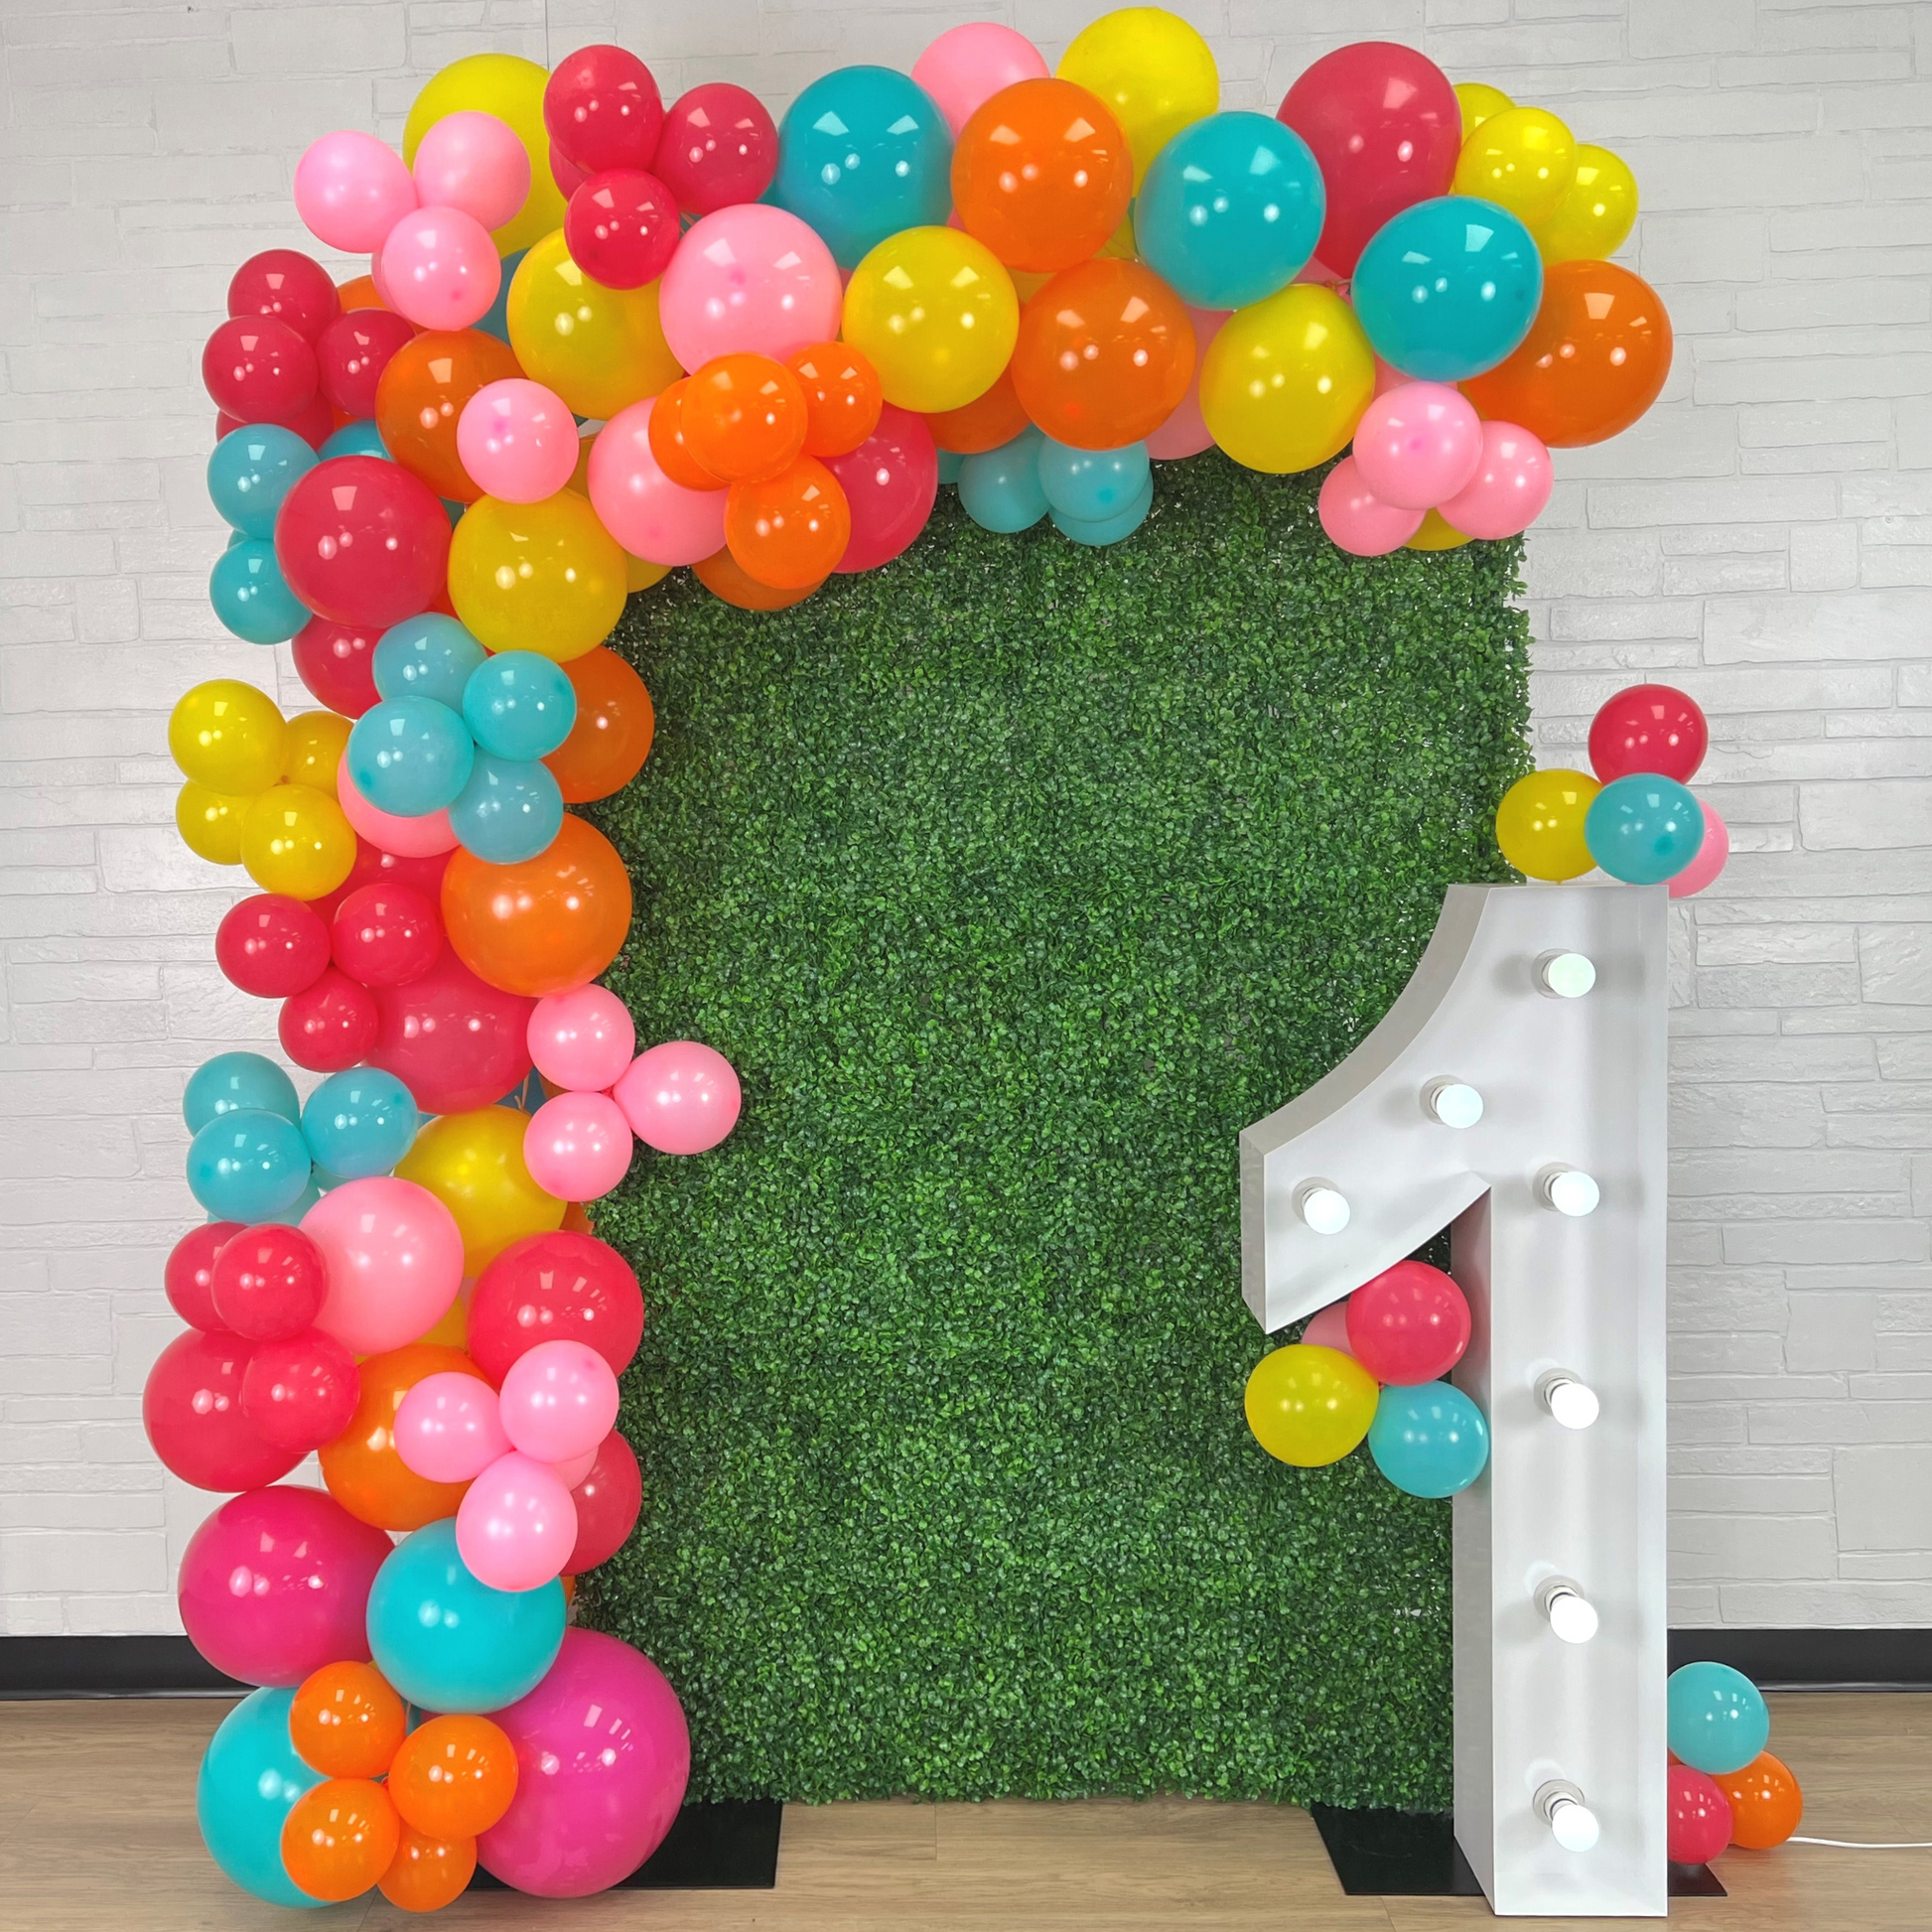 Large 4ft Tall LED Marquee Number - 1